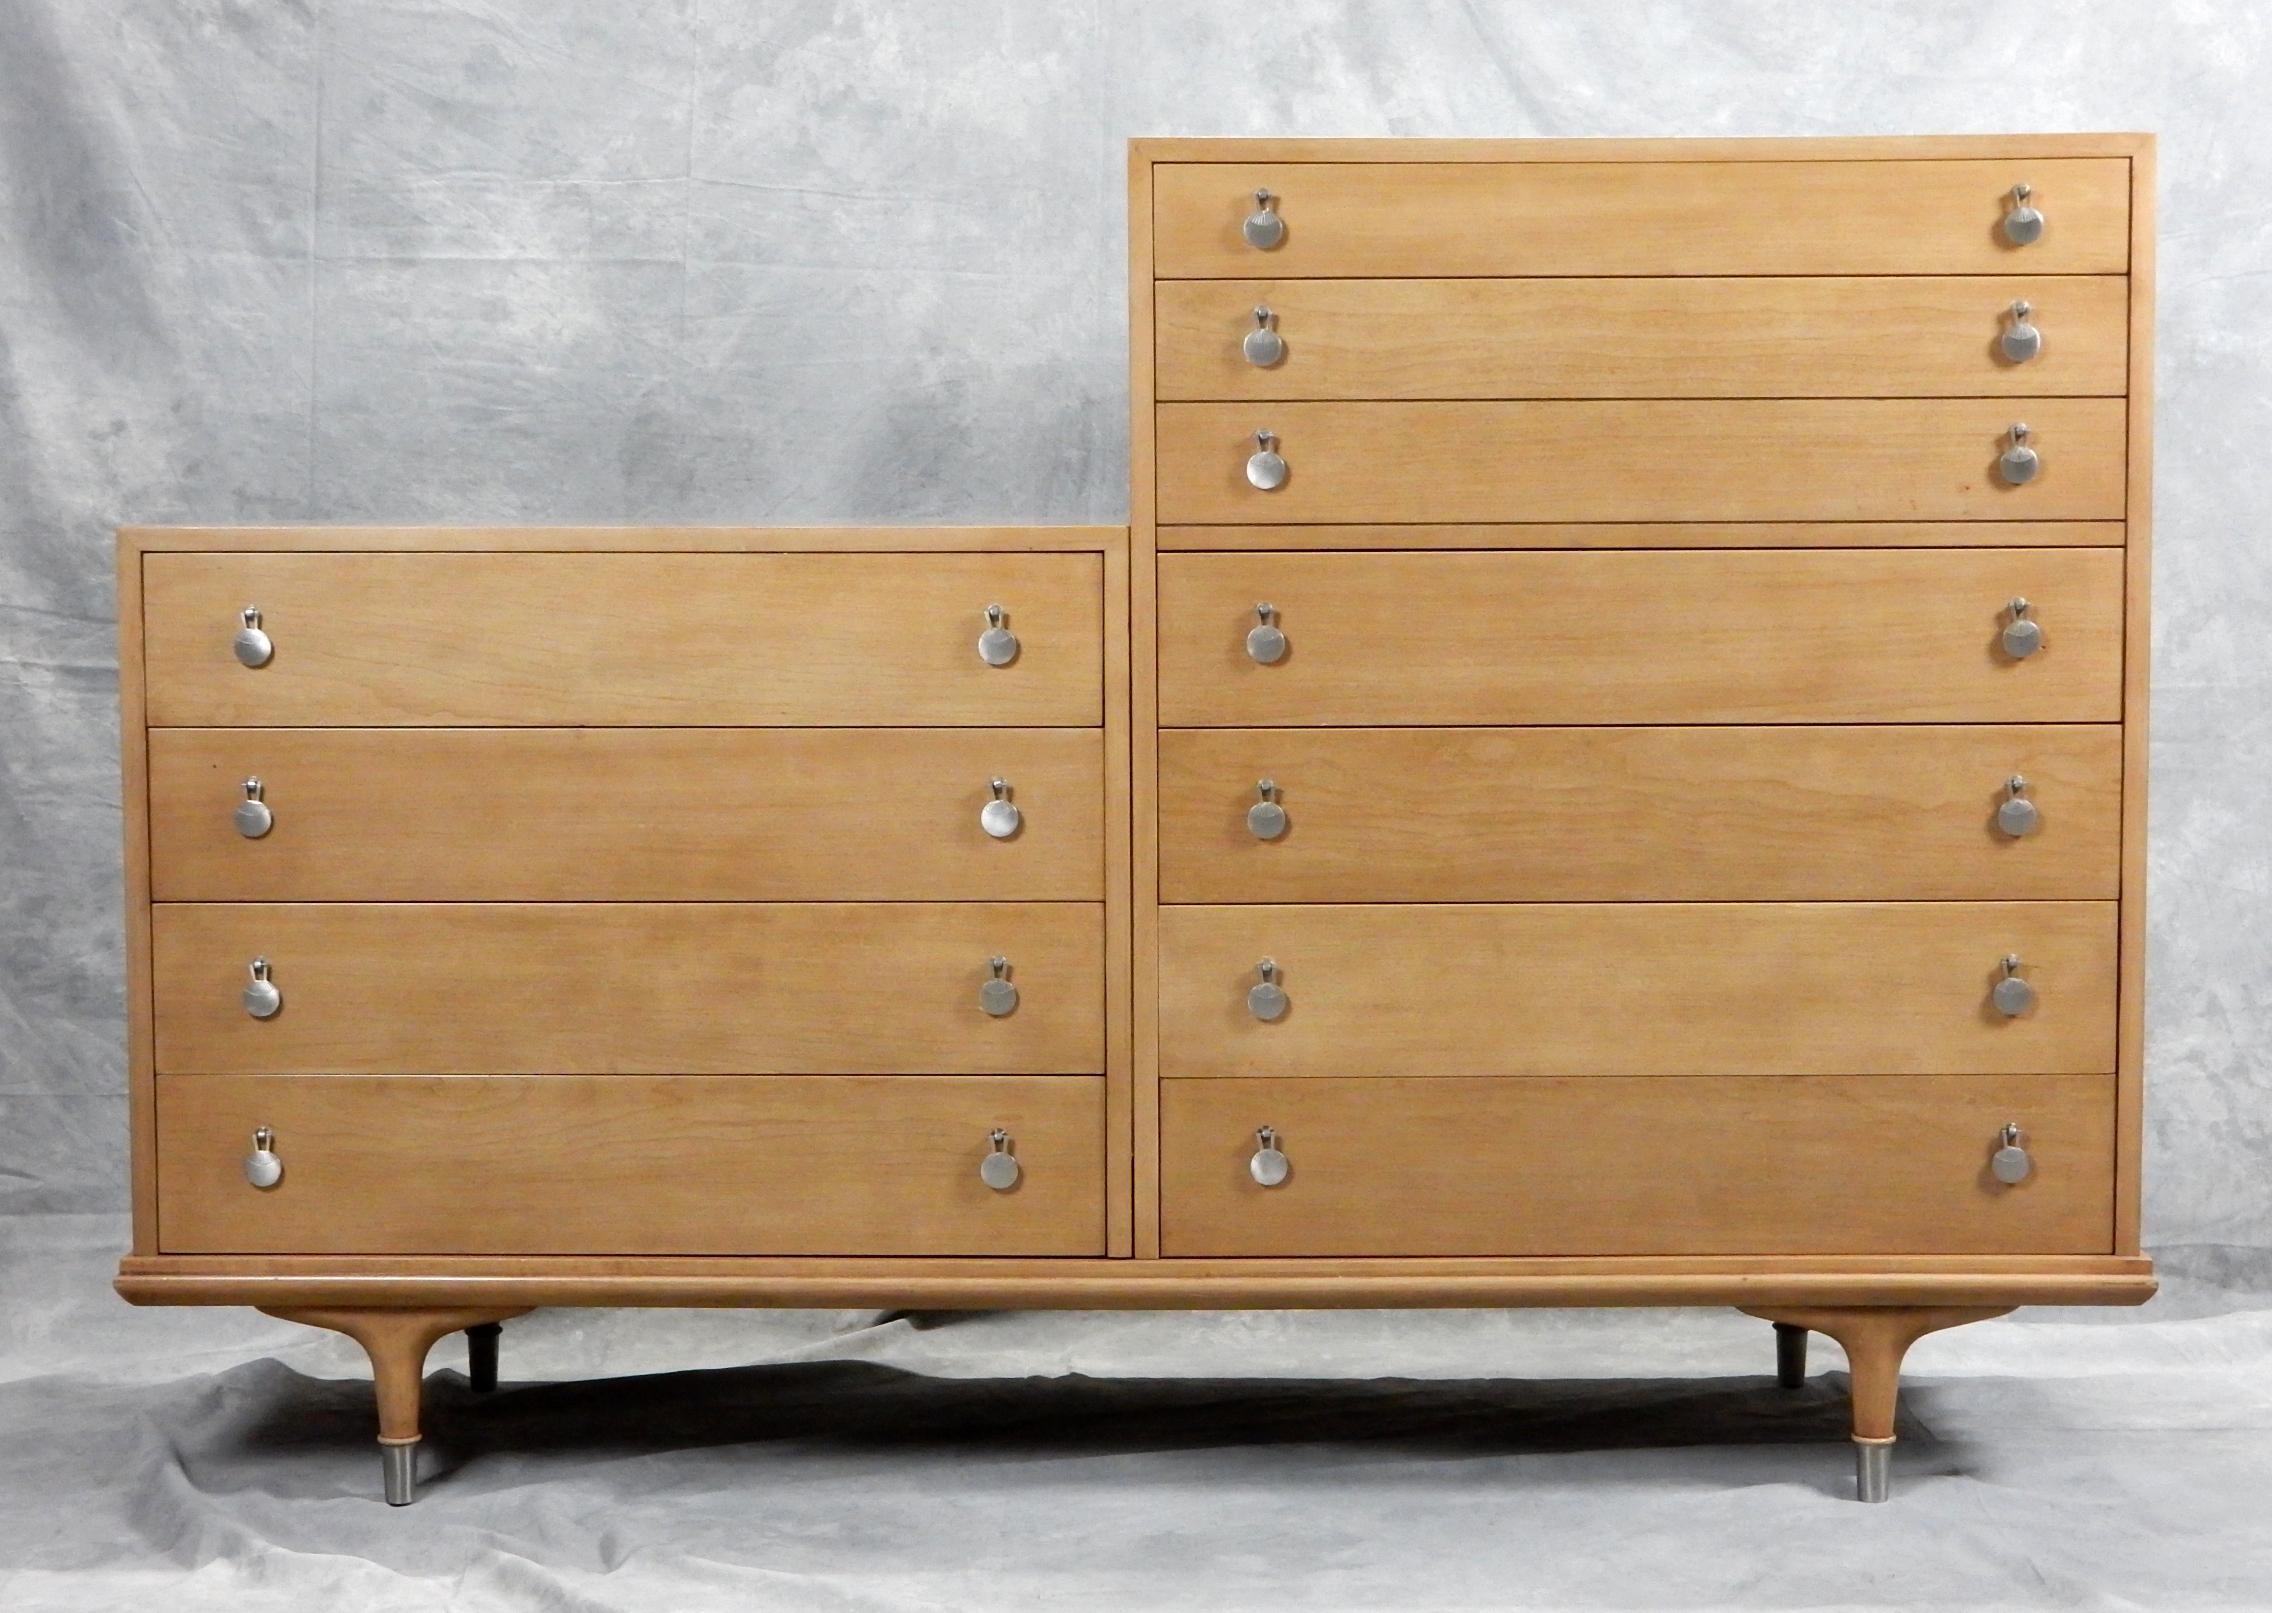 Exceptional quality chest of drawers by designer Renzo Rutili for Johnson Furniture, circa 1950.
Linear design with doorknocker metal pulls. 10 drawers in all.
Each of the 2 drawer cabinets set perfectly into base frame(each attached with 4